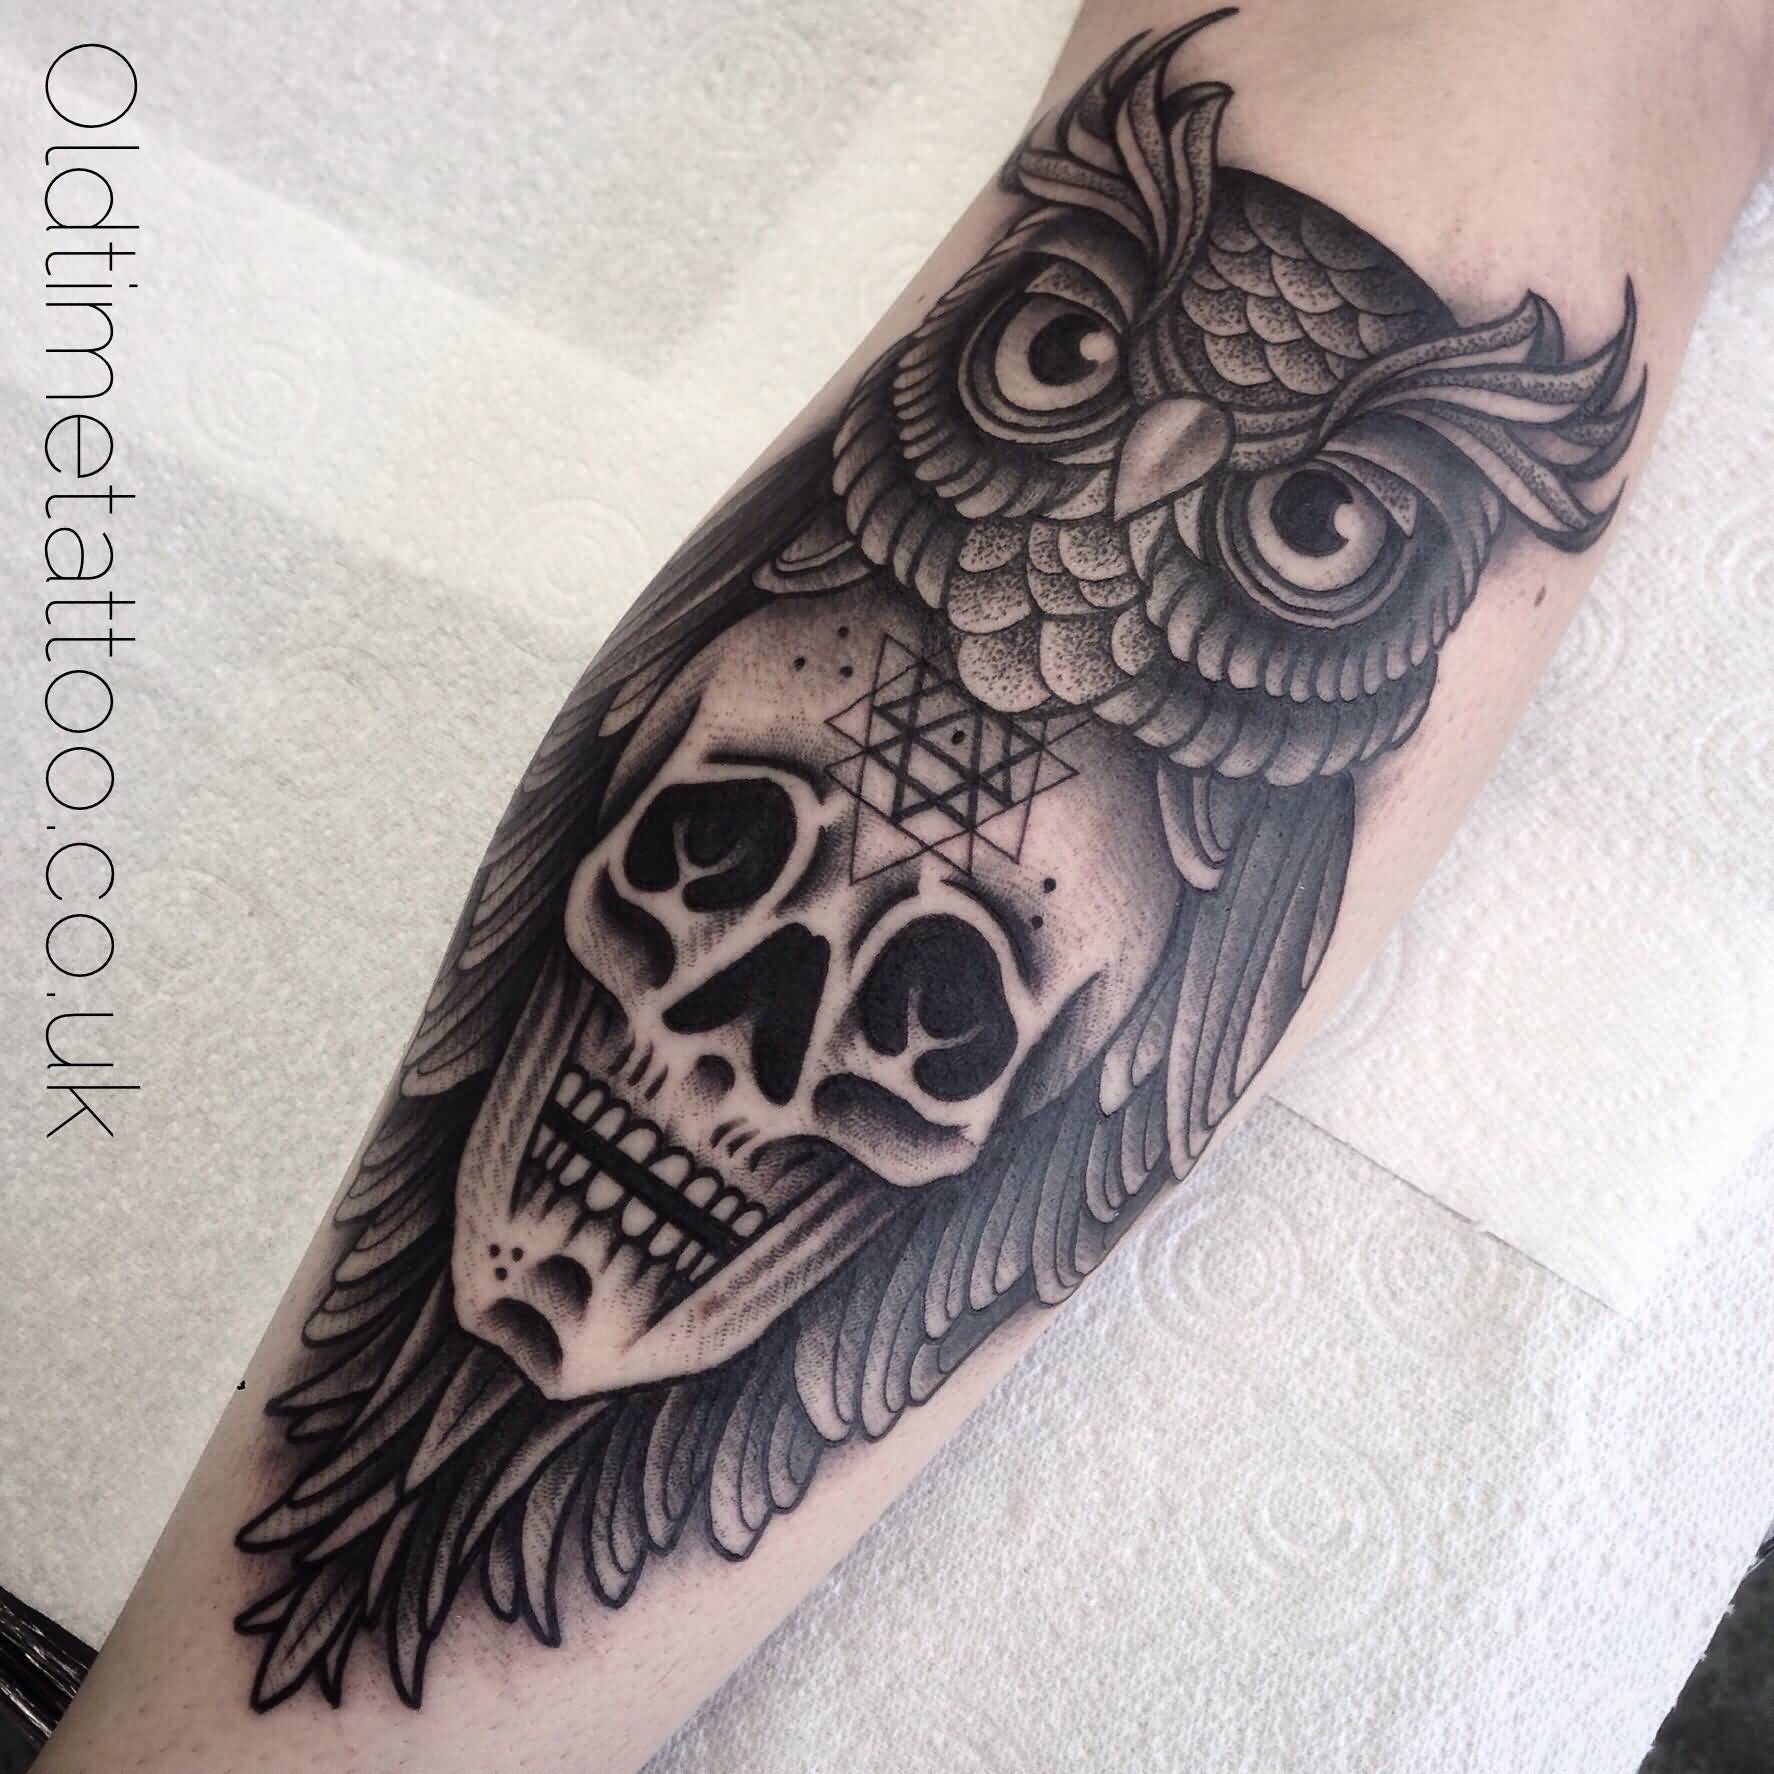 Black Ink Dotwork Owl With Skull Tattoo Design For Forearm By Josh Foulds